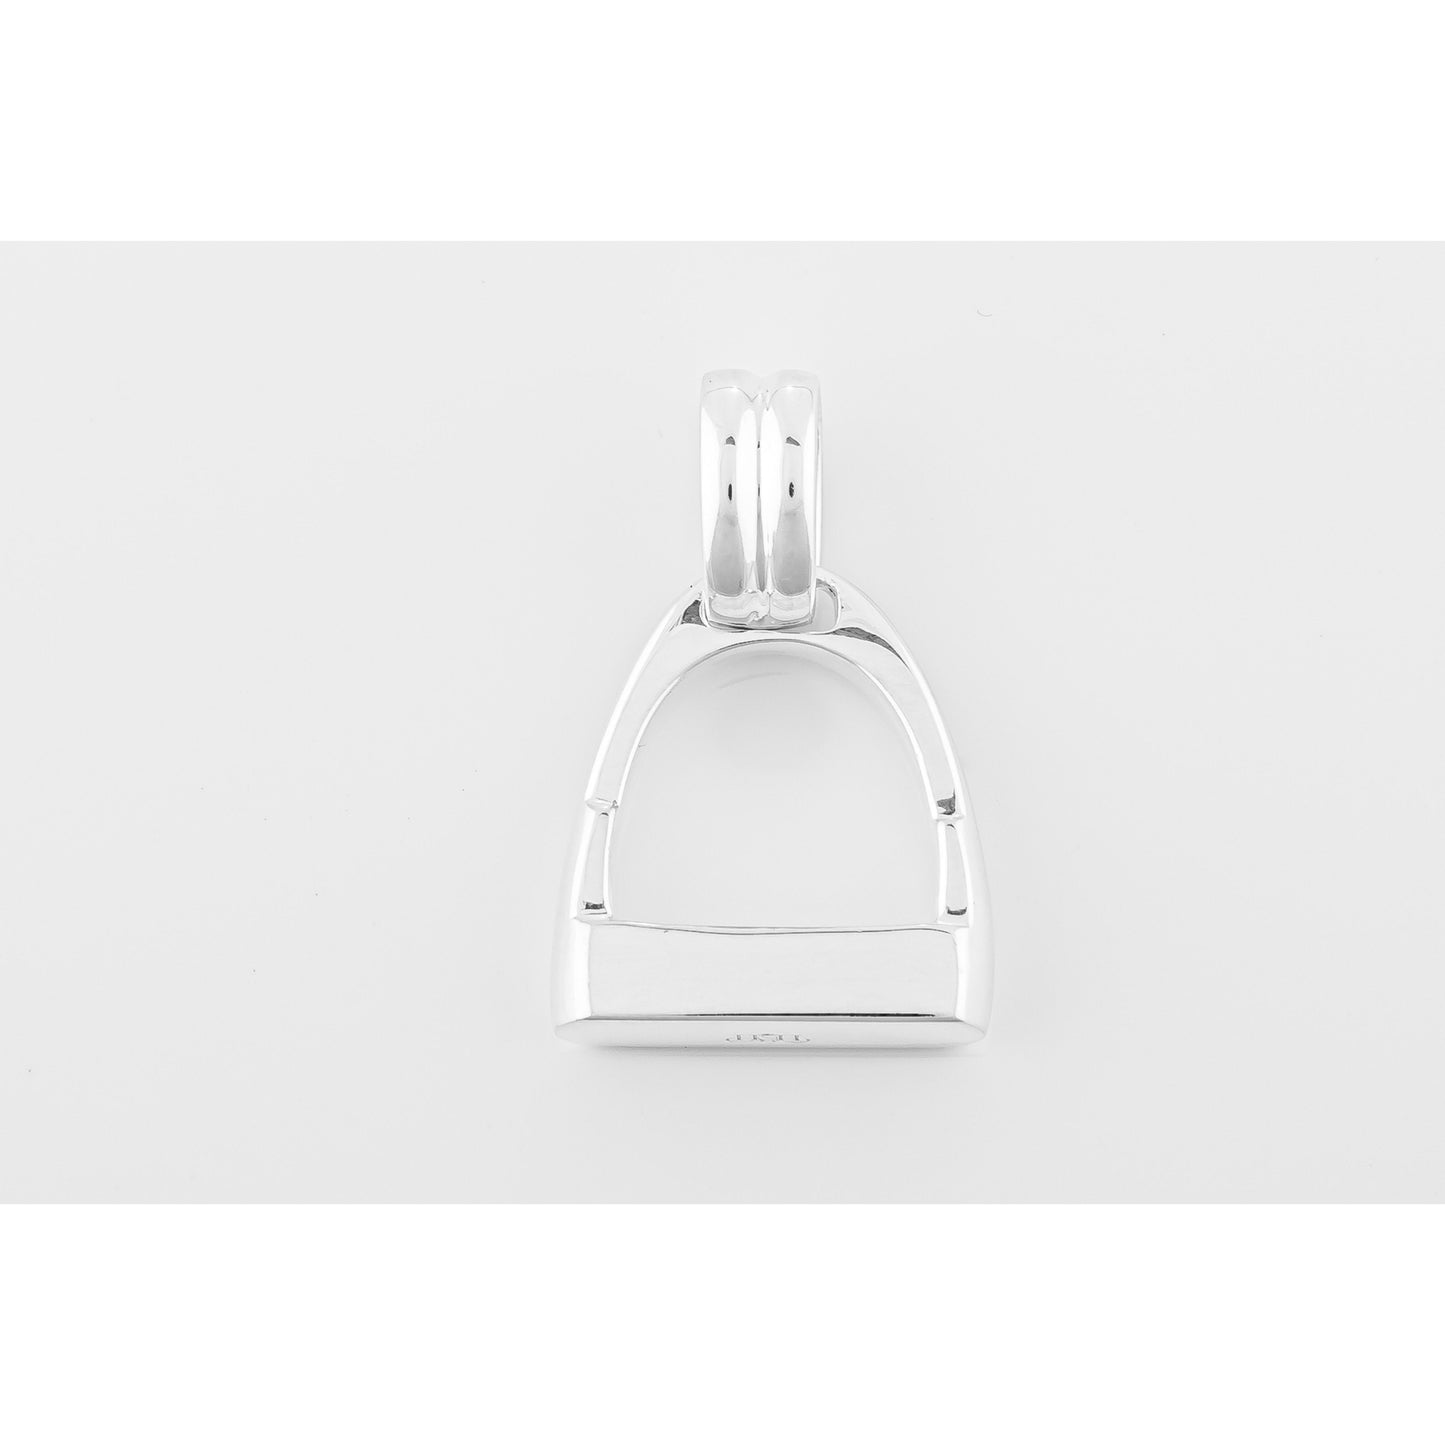 Silver pendant on white background.